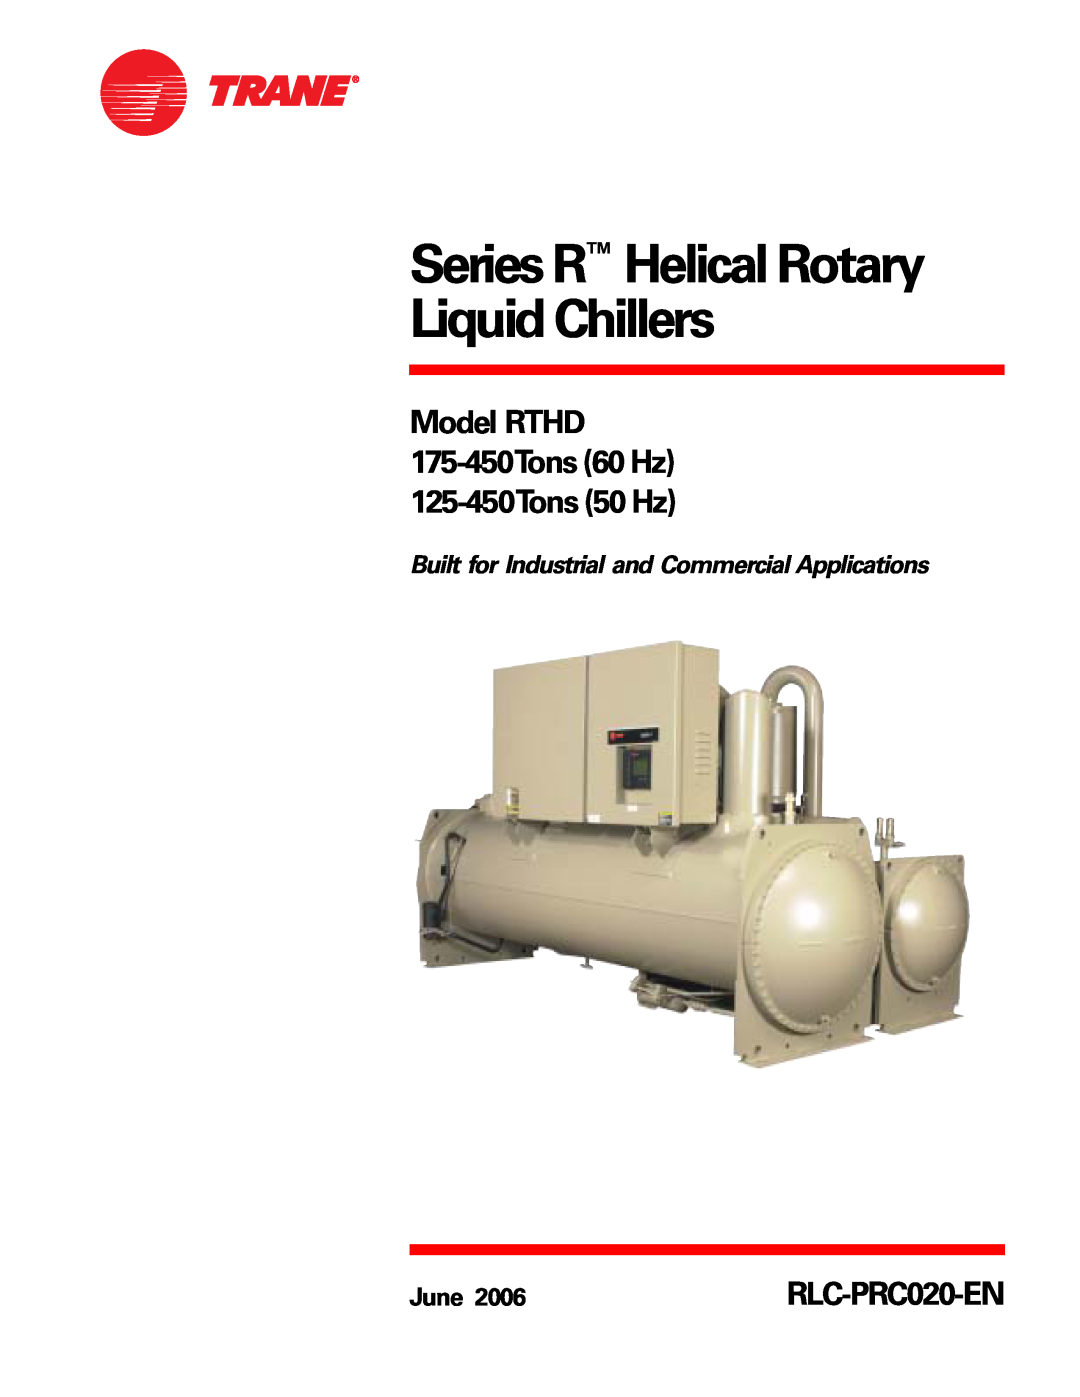 Trane manual Series R Helical Rotary Liquid Chillers, Model RTHD 175-450Tons60 Hz 125-450Tons50 Hz, June 